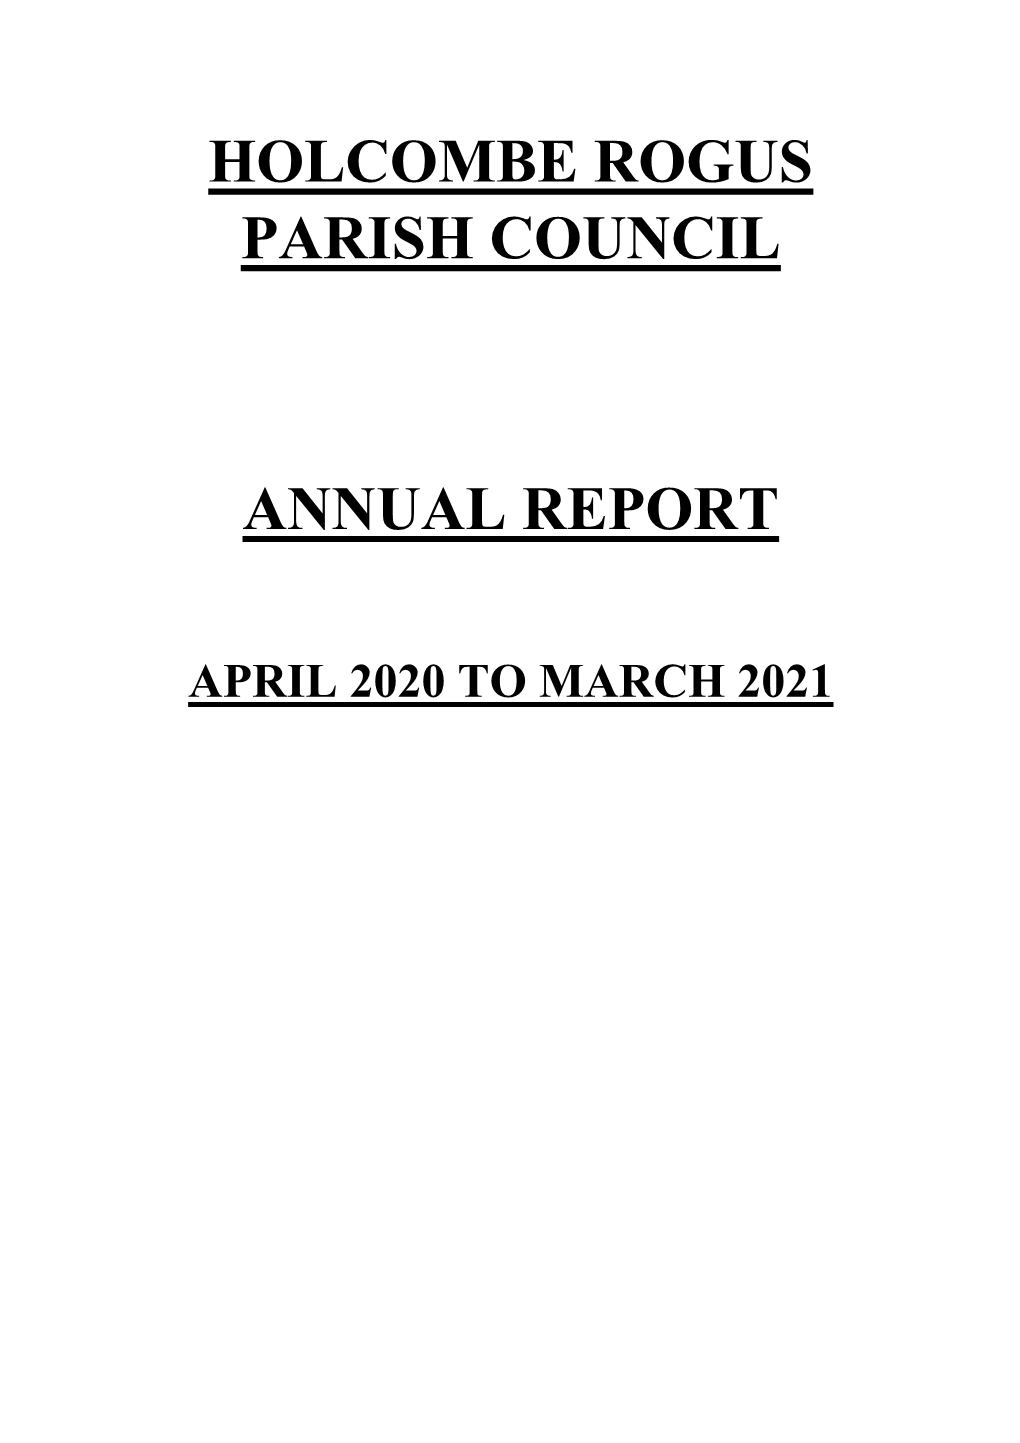 Holcombe Rogus Parish Council Annual Report